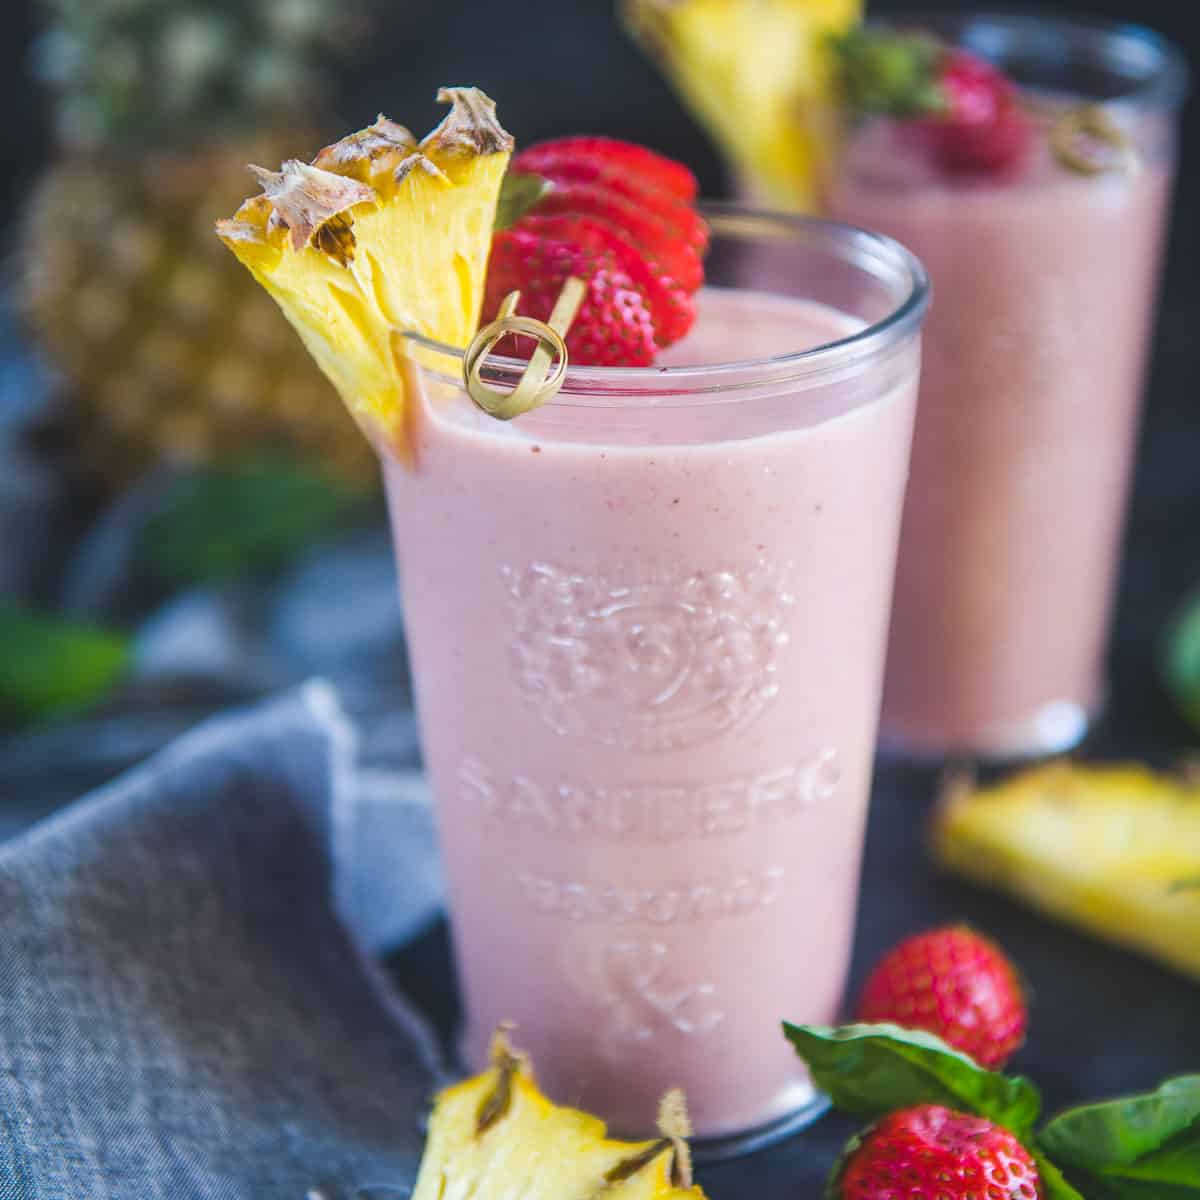 Strawberry Pineapple Smoothie Recipe (Steps + Video ...